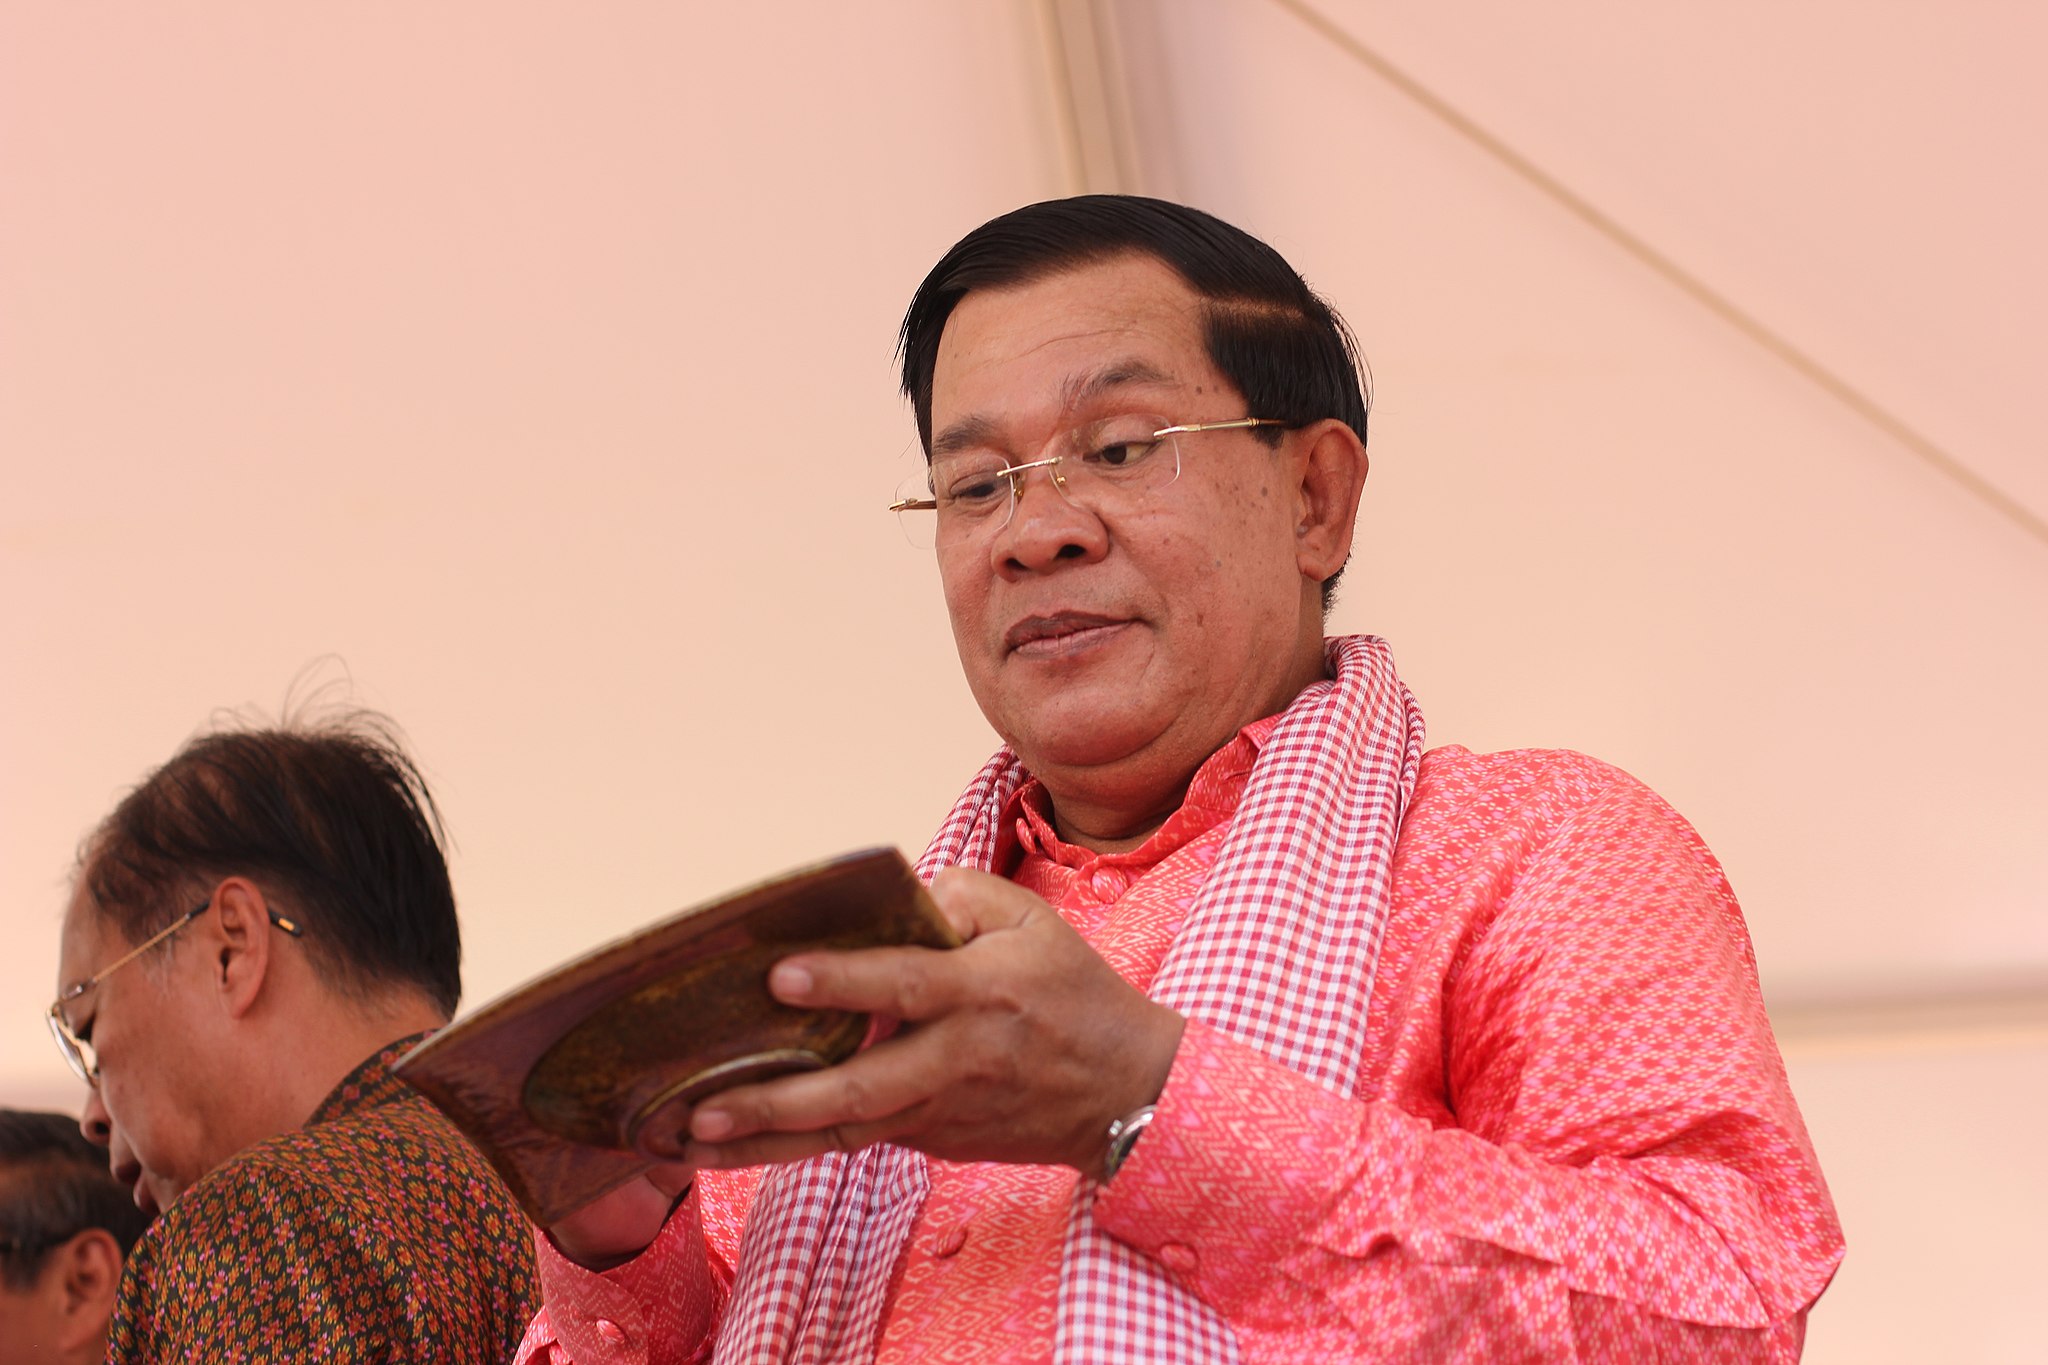 Meta Oversight Board recommends 6 month suspension of Cambodia PM social media